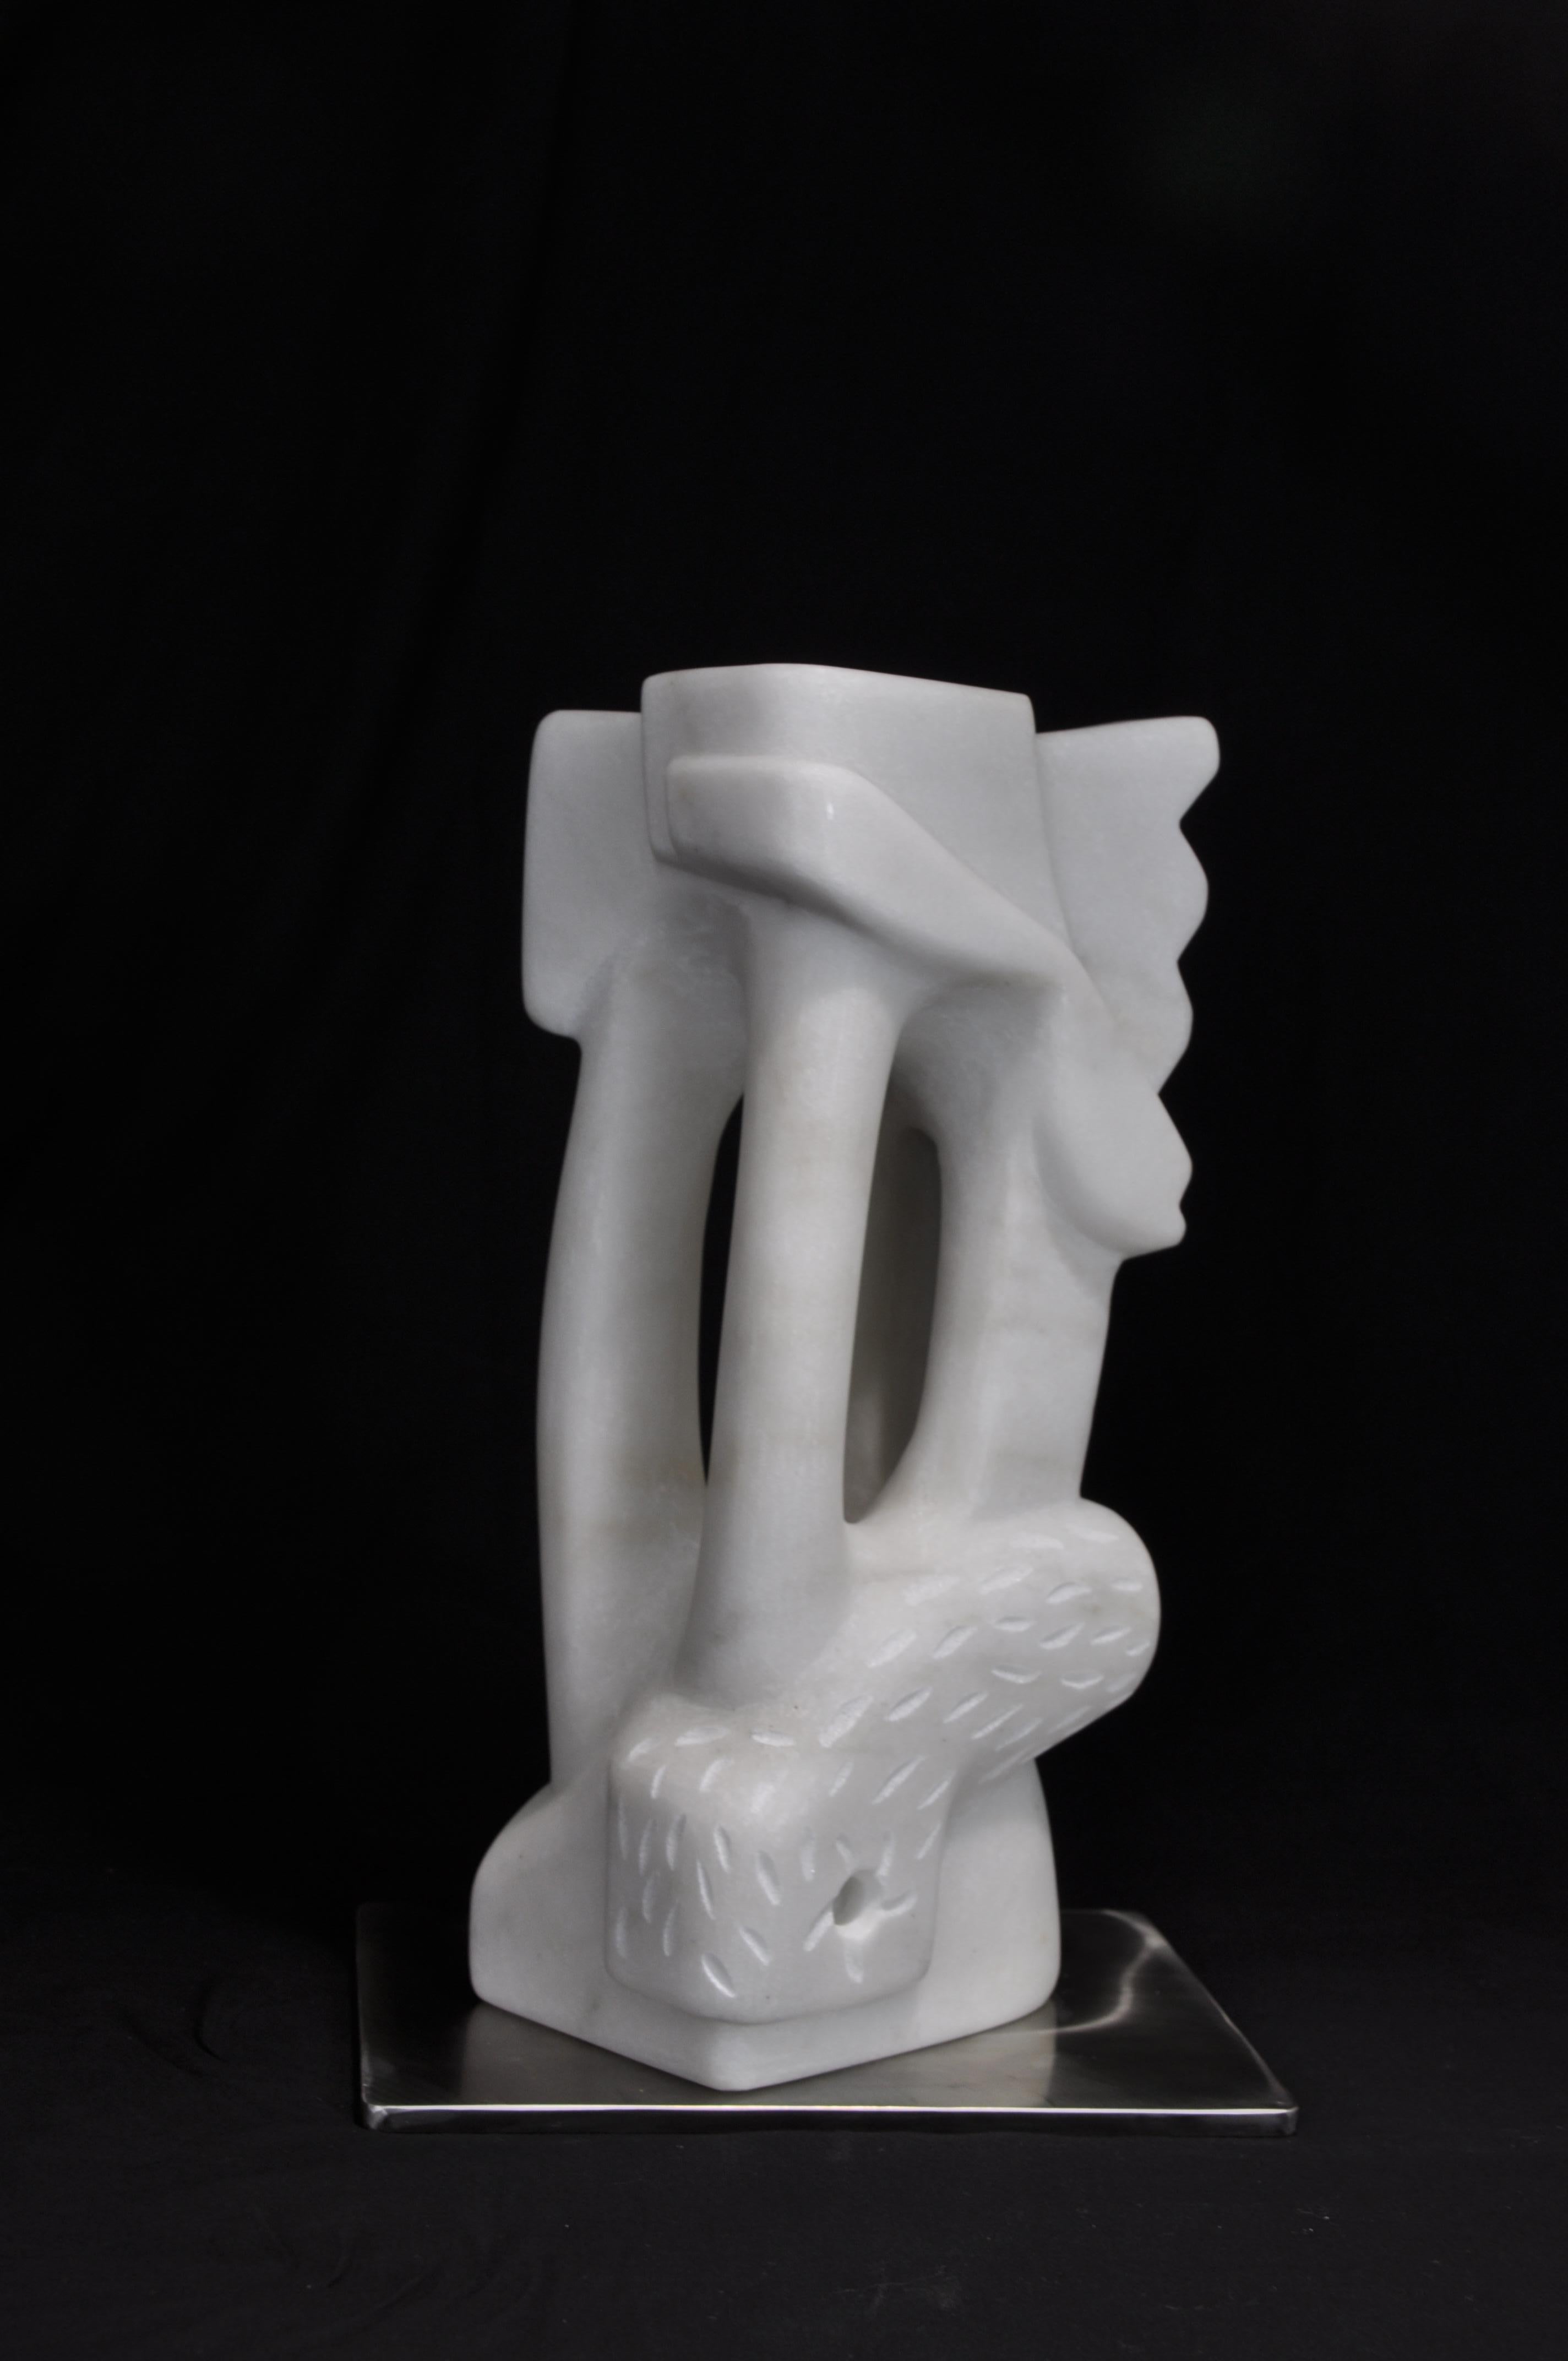 Angel - Marble Sculpture, Abstract, Stone, Contemporary, Art, Marco Brás - Black Figurative Sculpture by Marco Bras